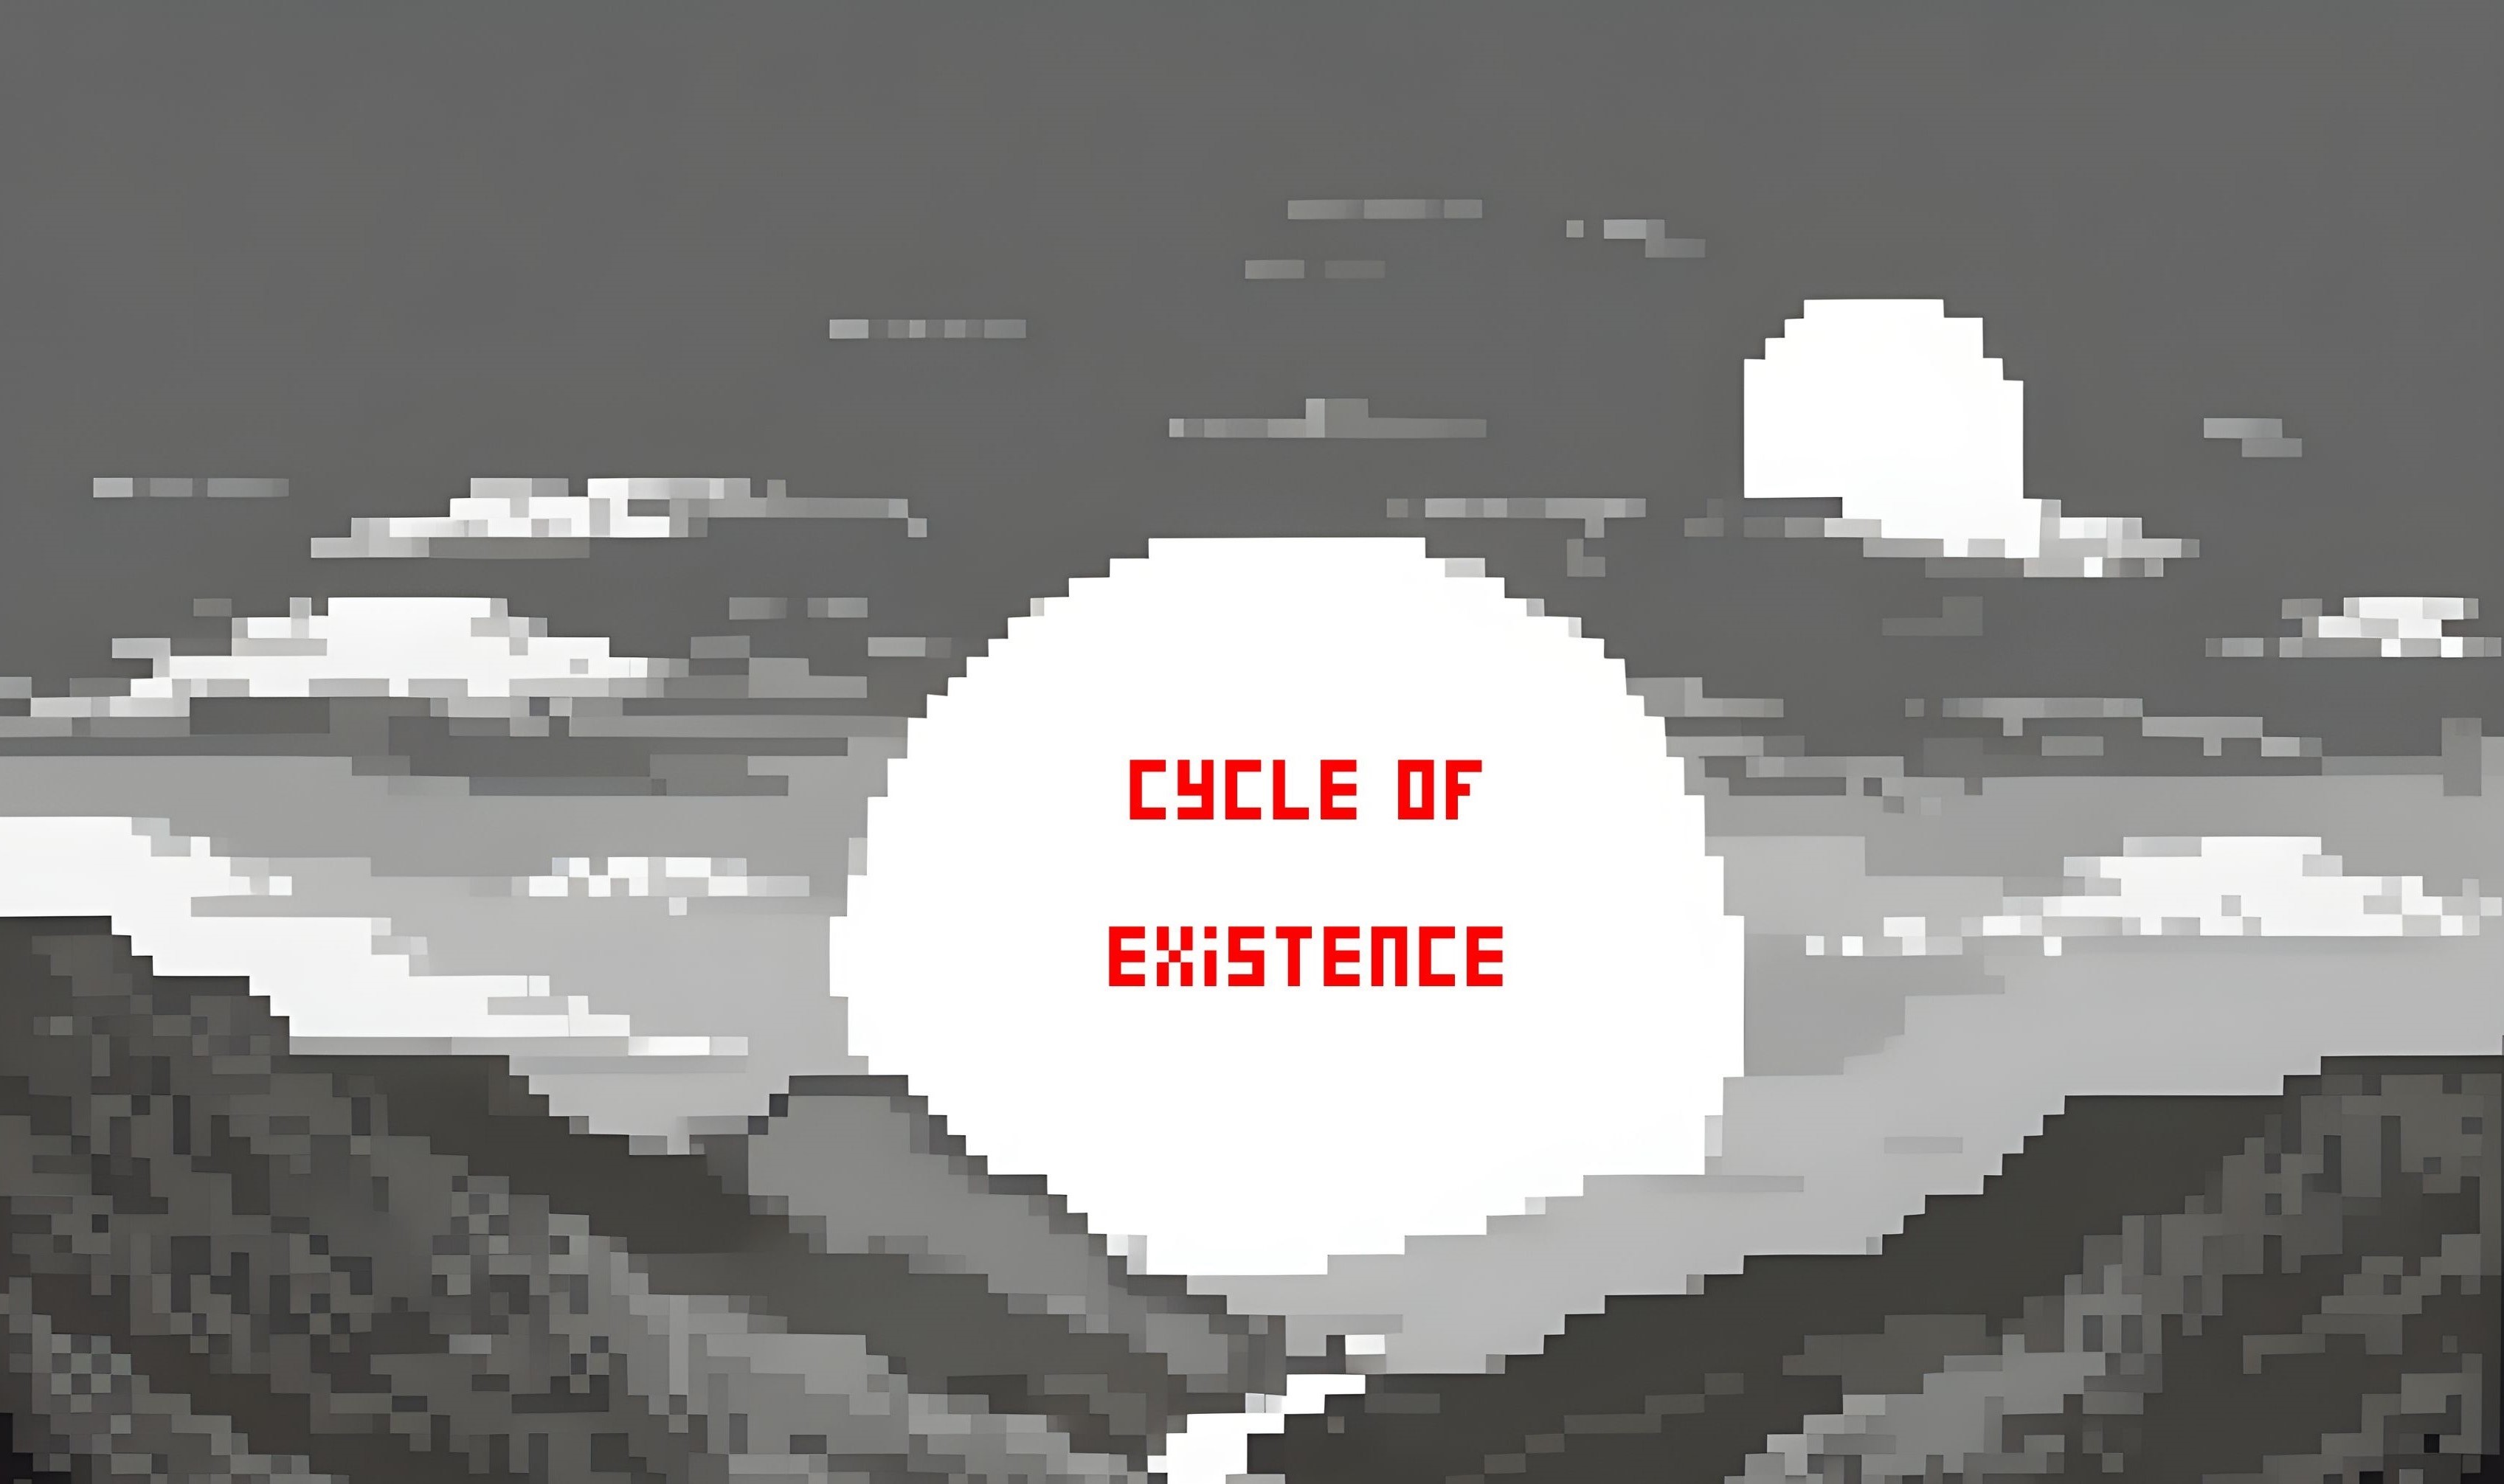 Cycle of Existence